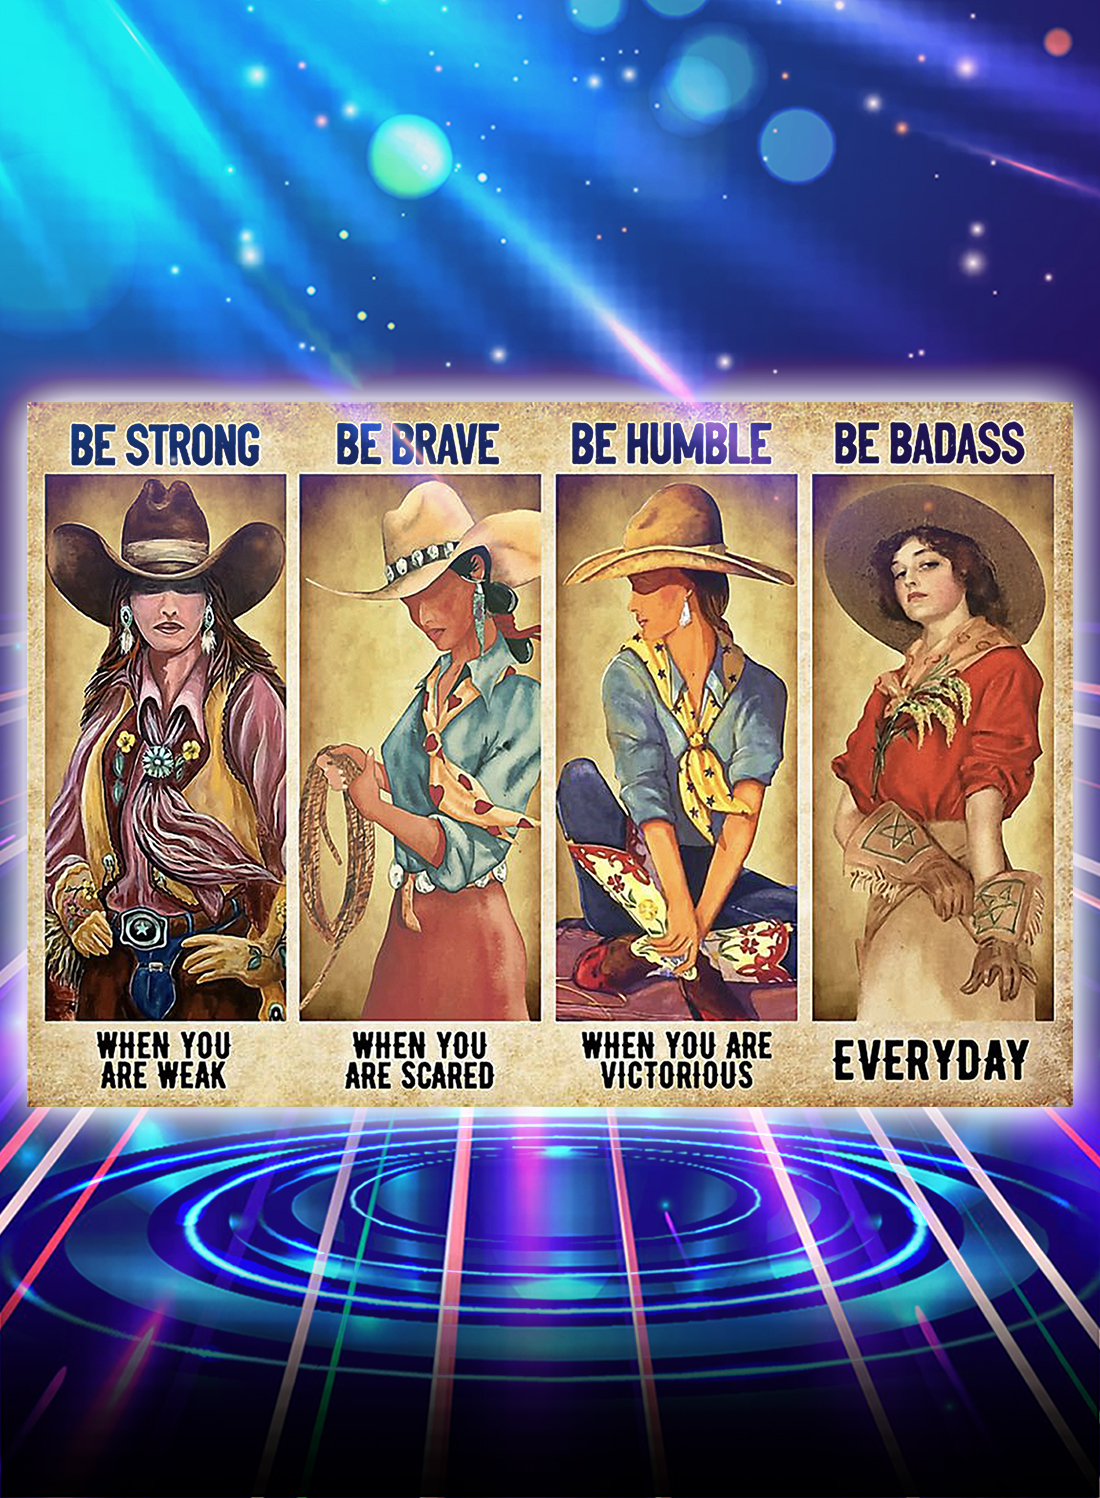 Cowgirl be strong be brave be humble be badass poster - A4